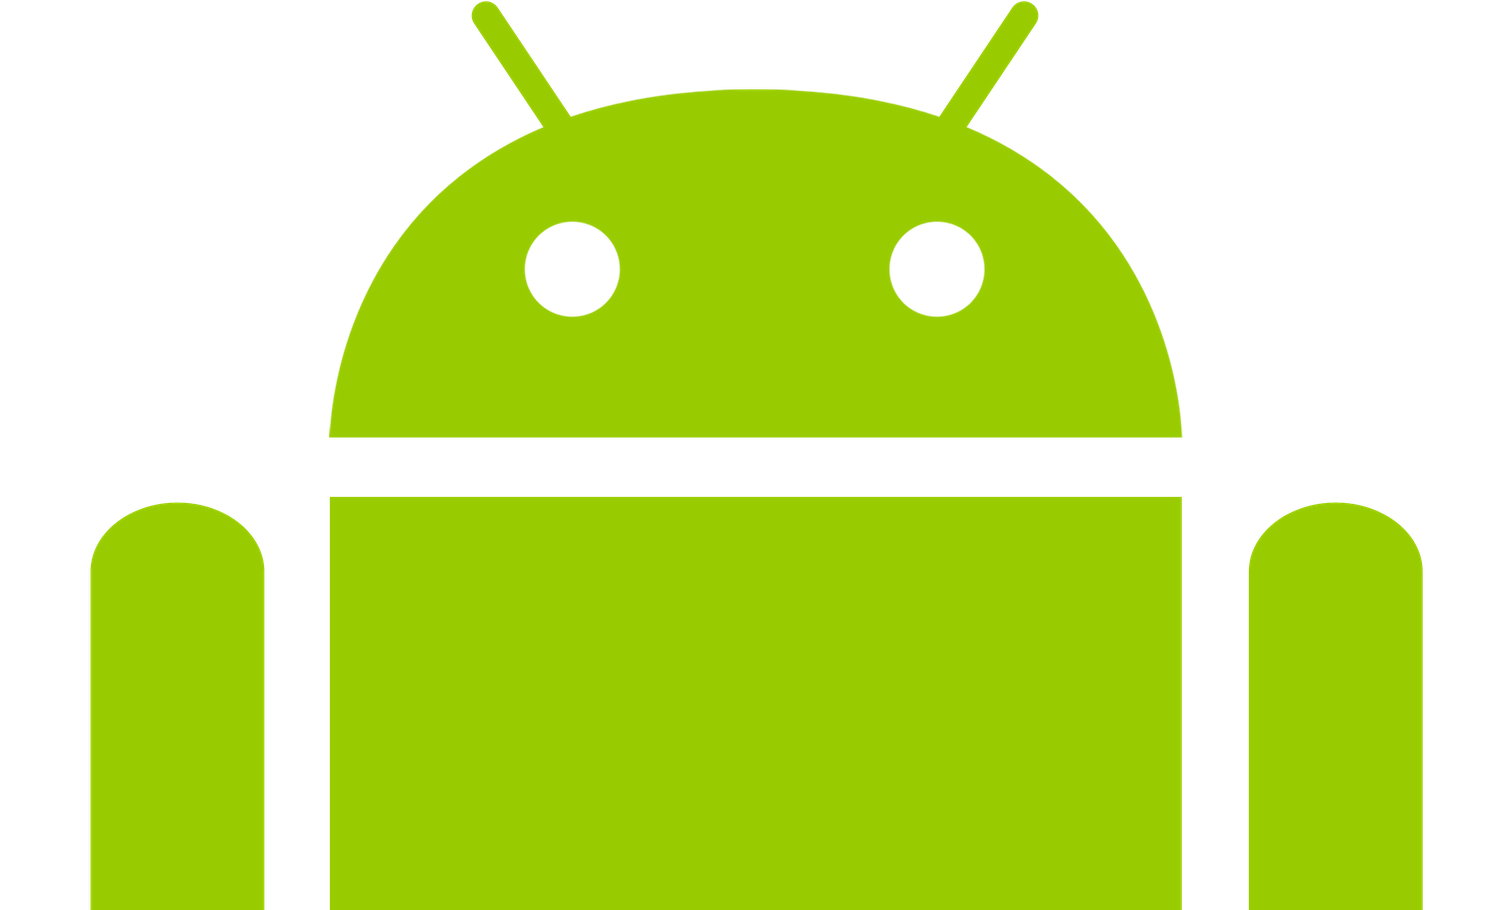 All Eyes on Android